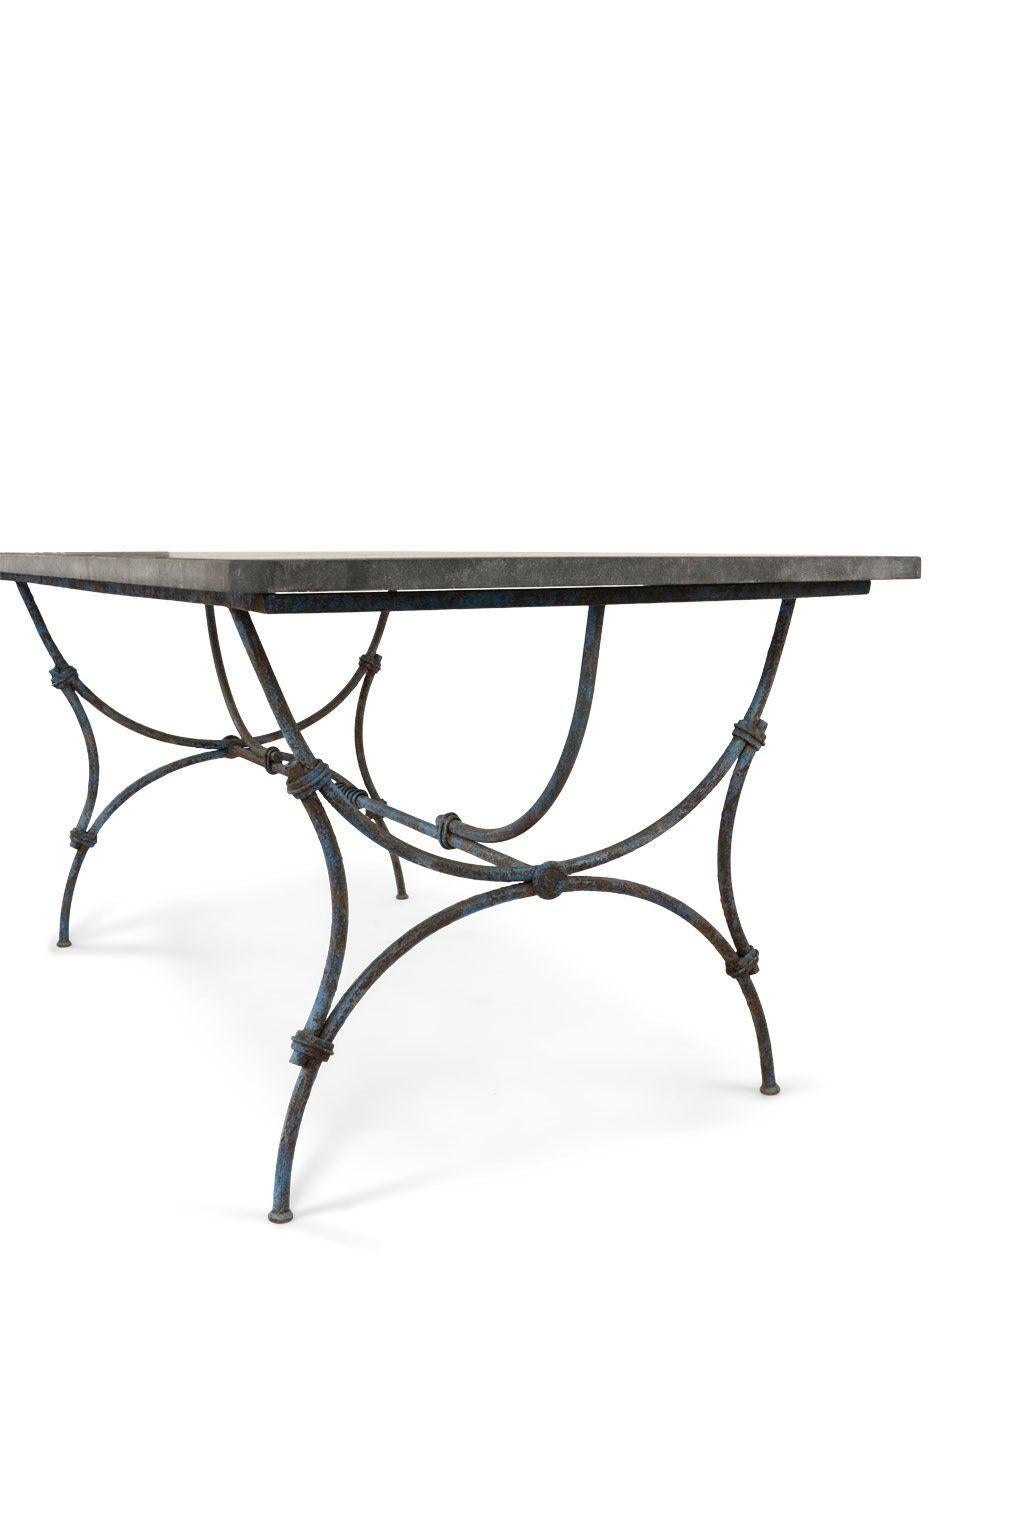 Bluestone top iron garden table: rectangular thick bluestone top upon a painted 19th century forged iron trestle base. Gracefully-shaped arched legs.

Note: Finishes on antique and vintage metal will include some, or all, of the following: patina,